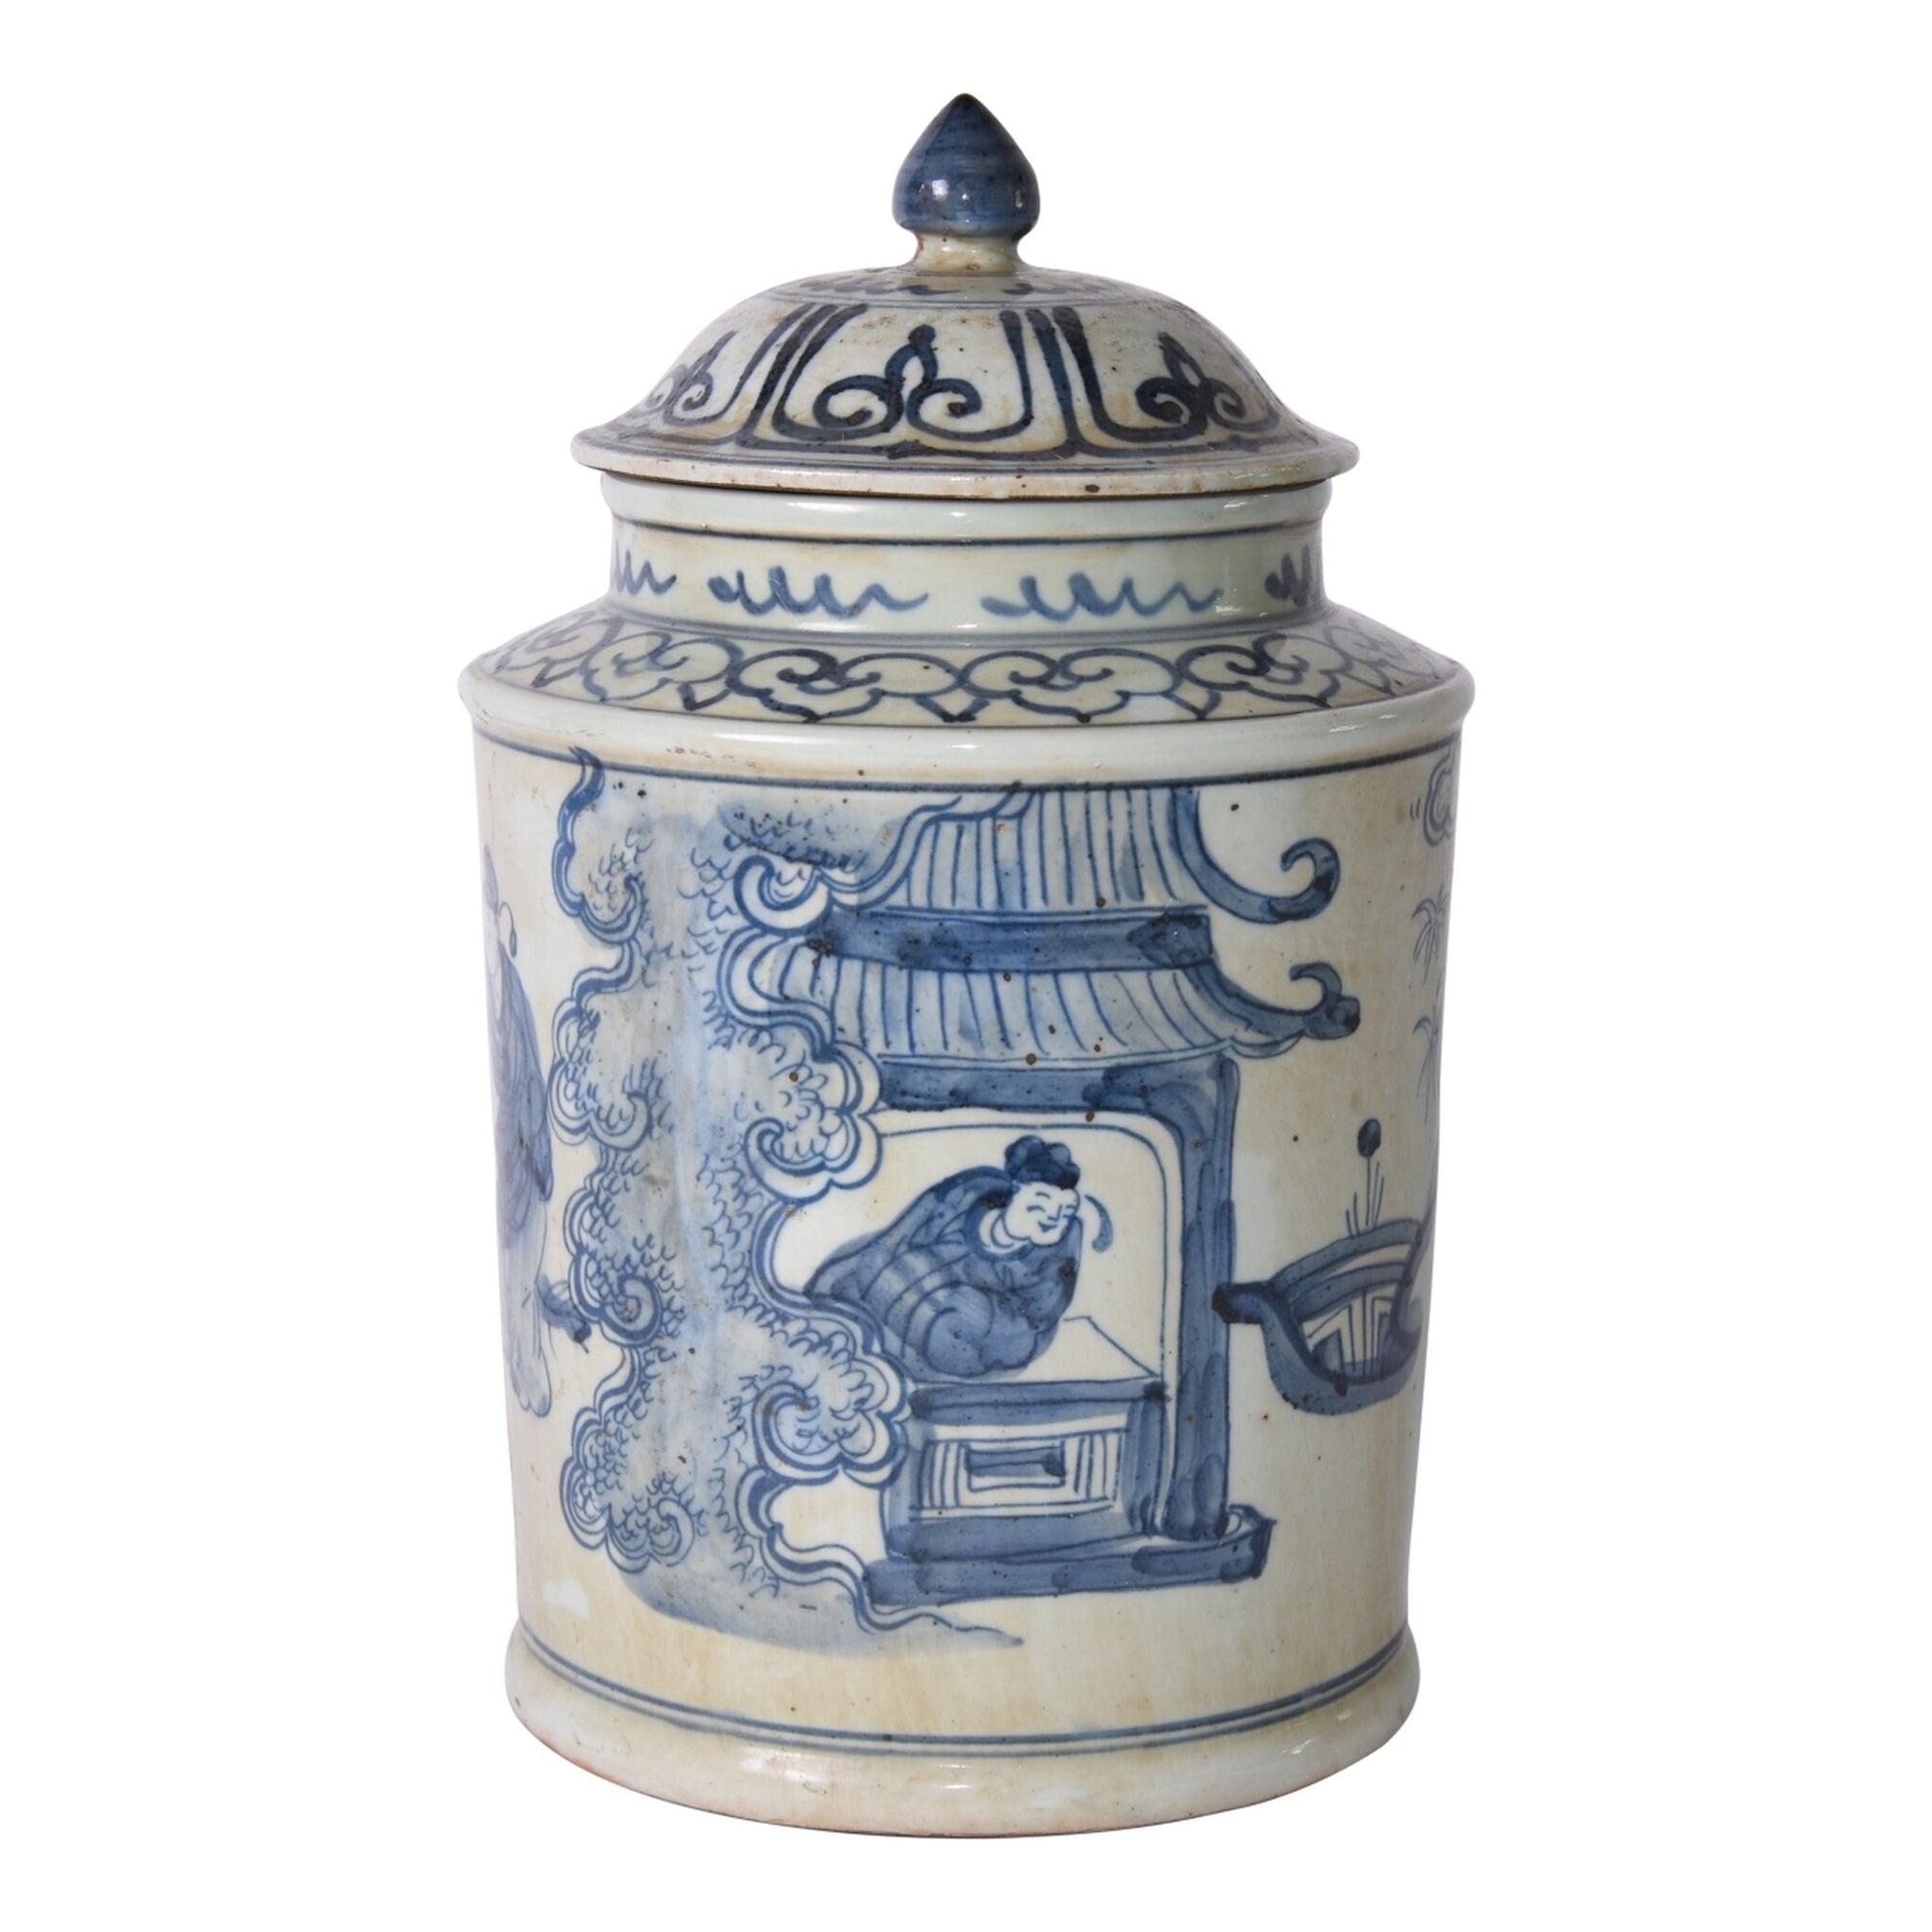 Decorative Accessories  Chinoiserie  Blue and White  Blue & White  asian  Accessories Blue & White